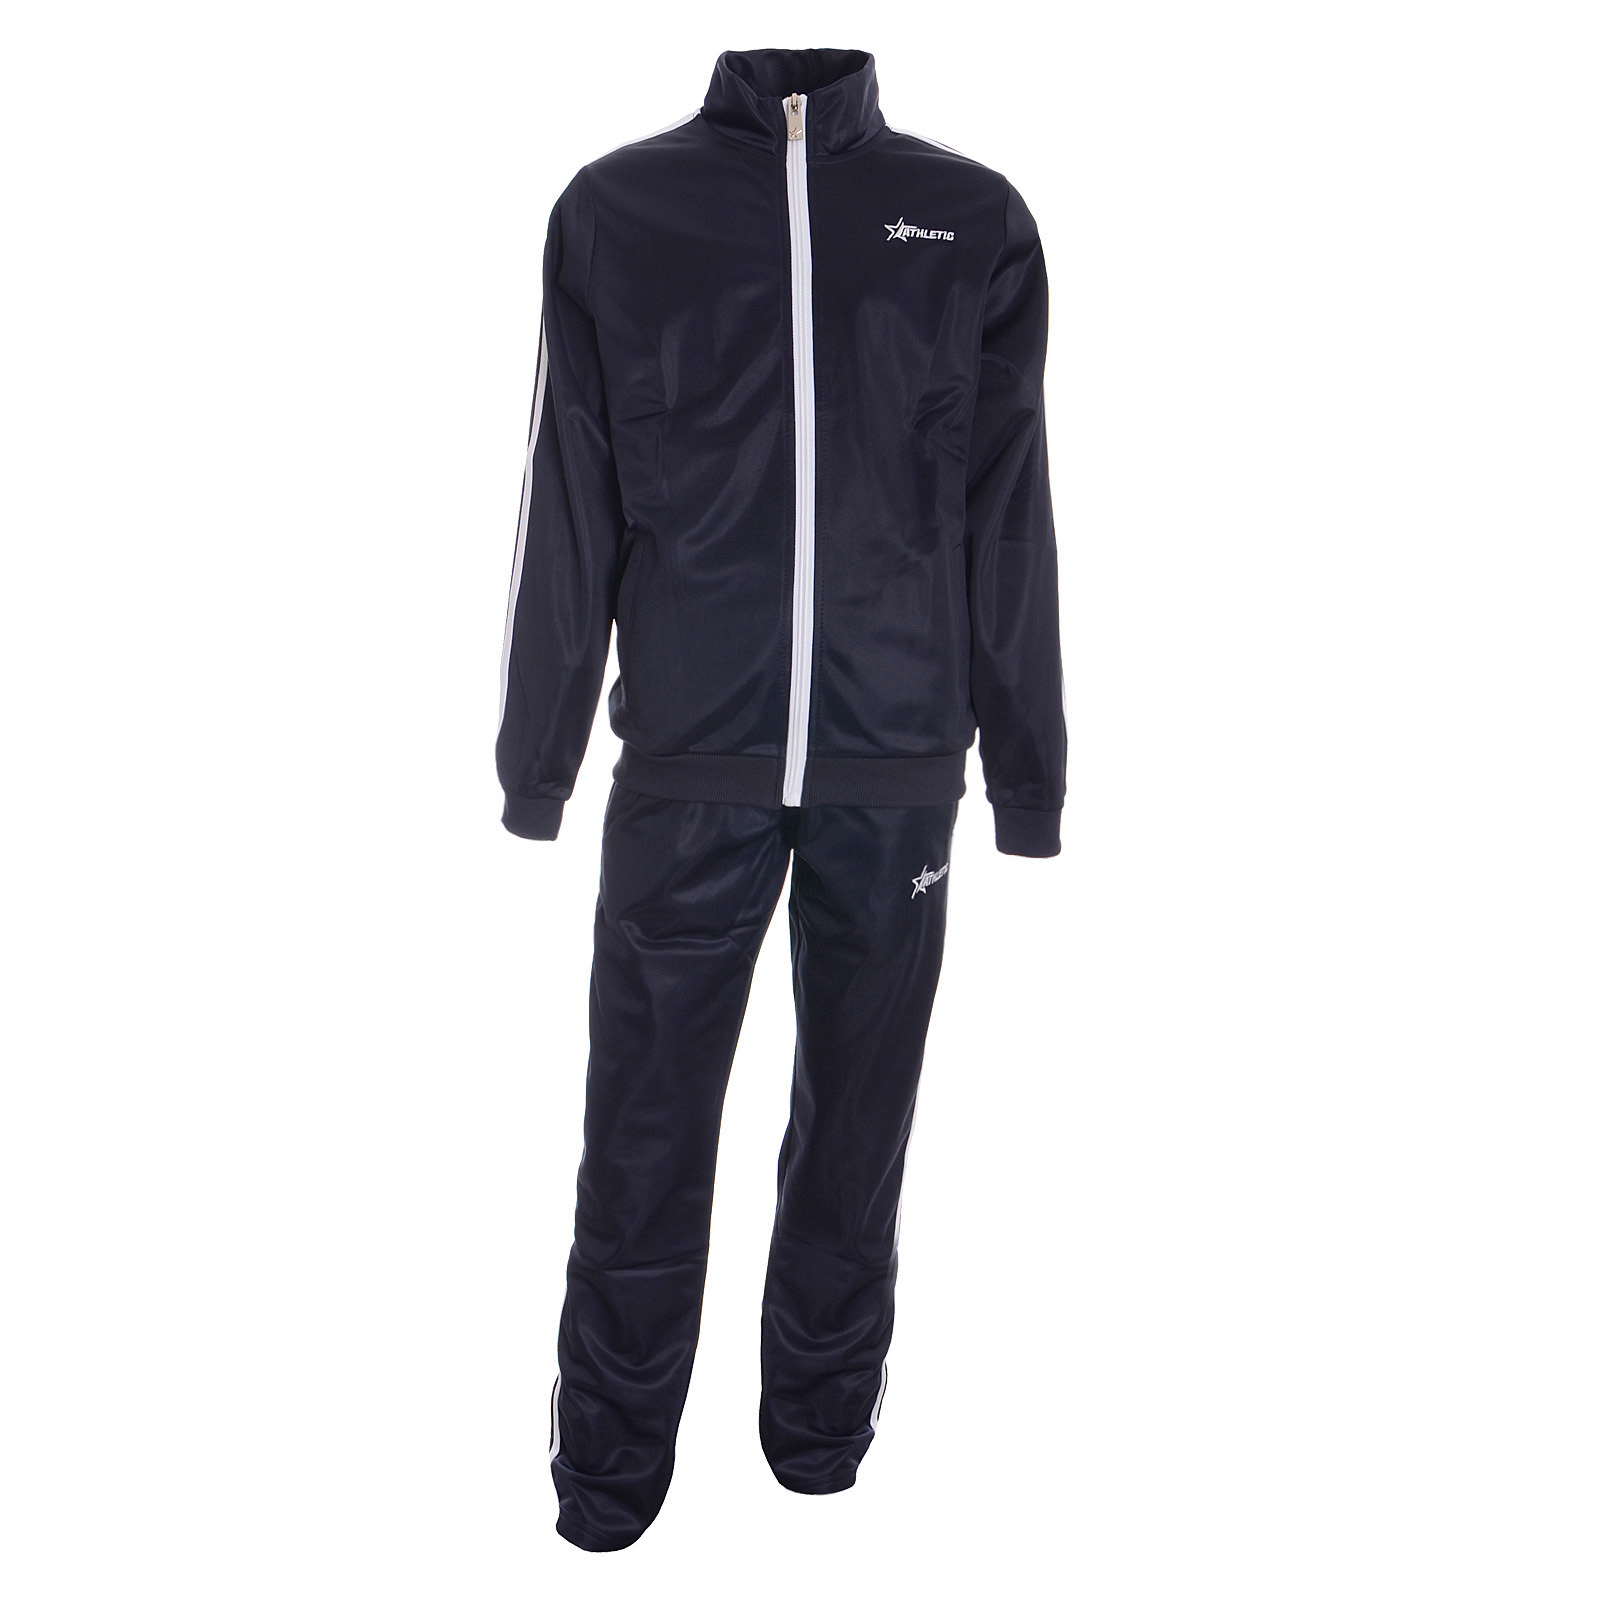 Athletic ATHLETIC BOY'S TRACK SUIT 